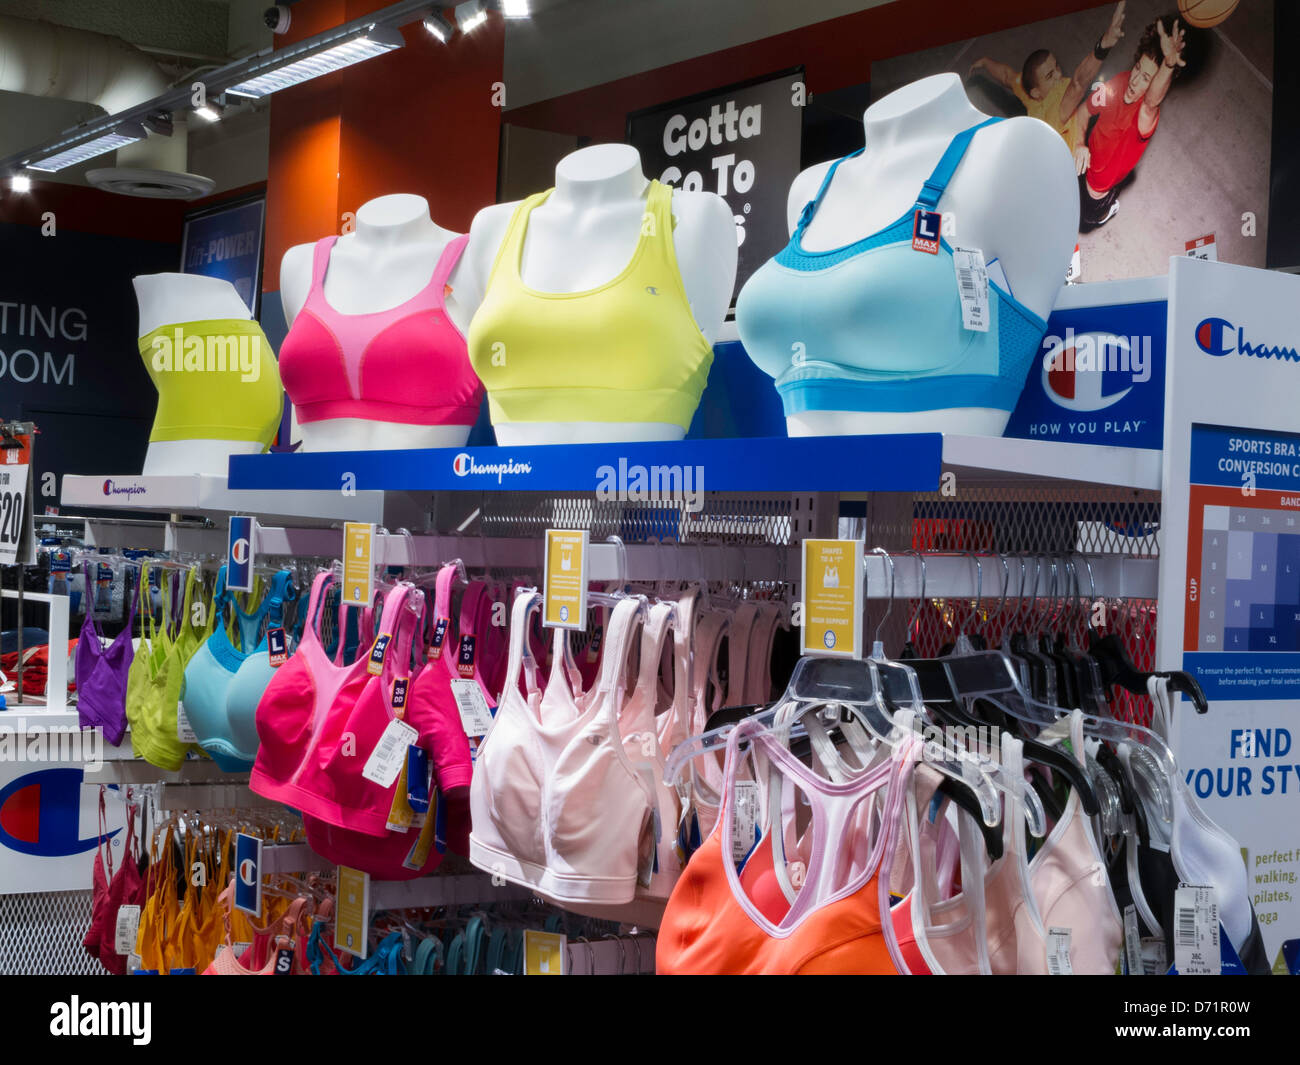 Sports Bras Display, Modell's Sporting Goods Store Interior, NYC Stock  Photo - Alamy